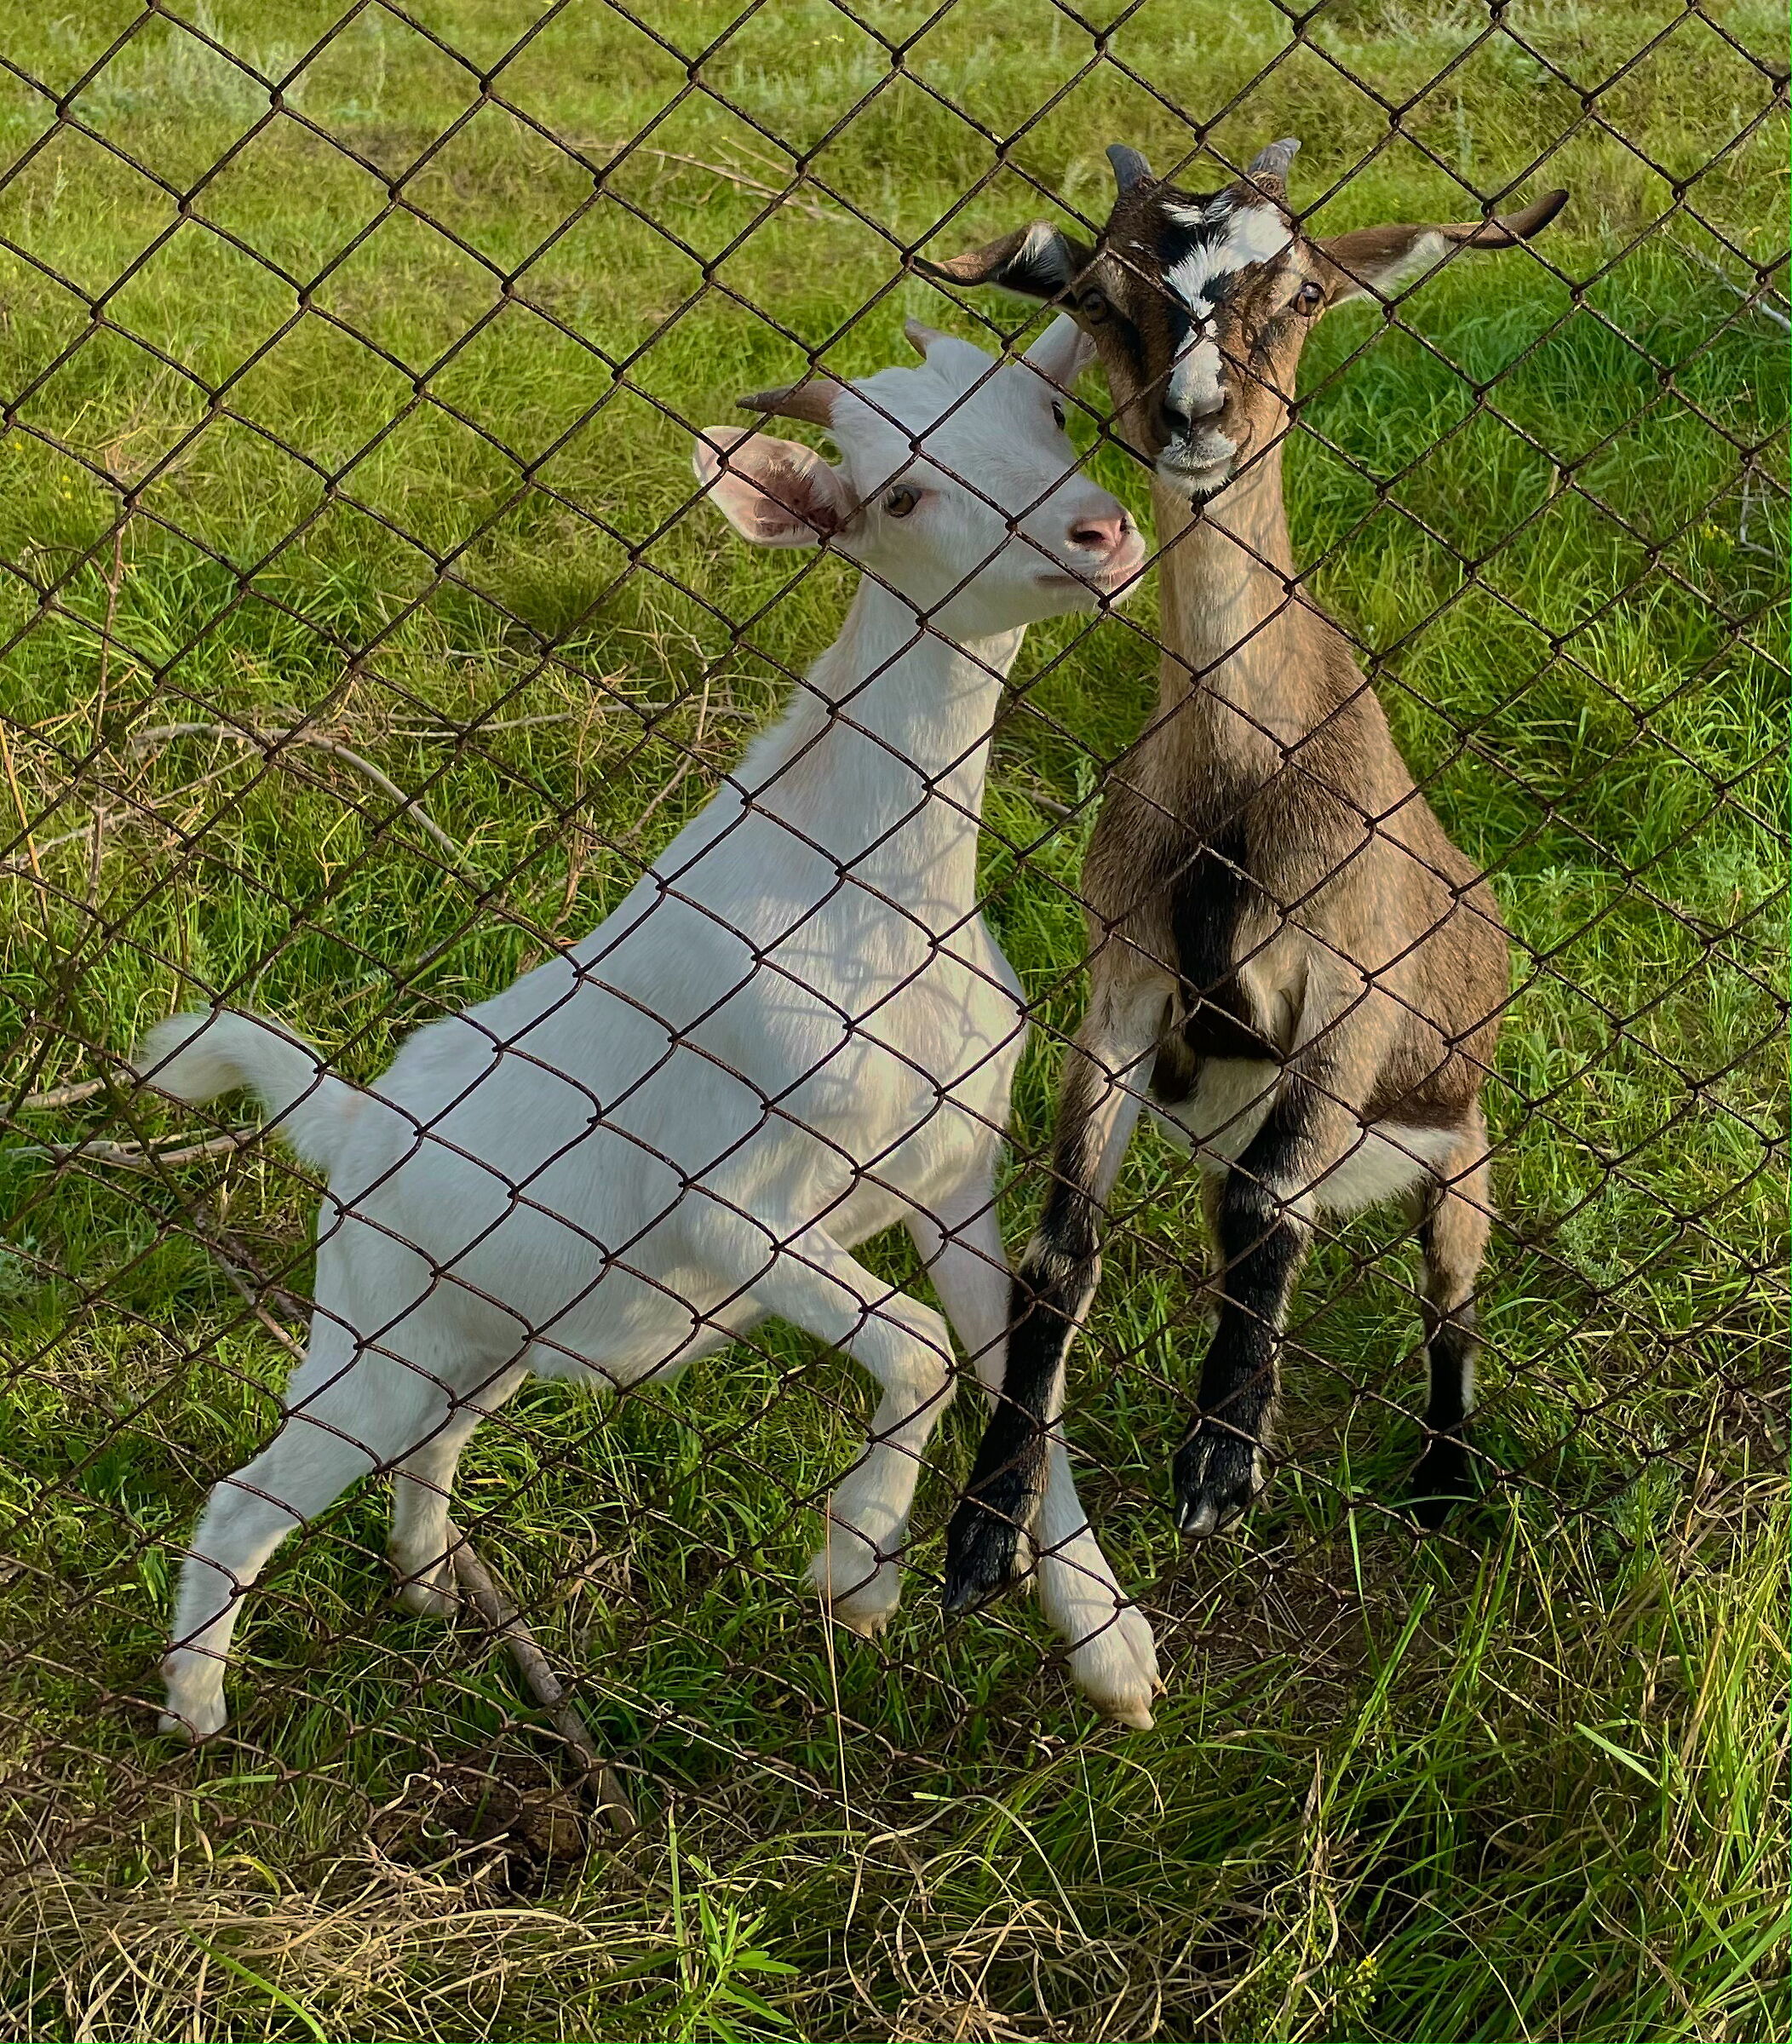 young goats behind a fence...